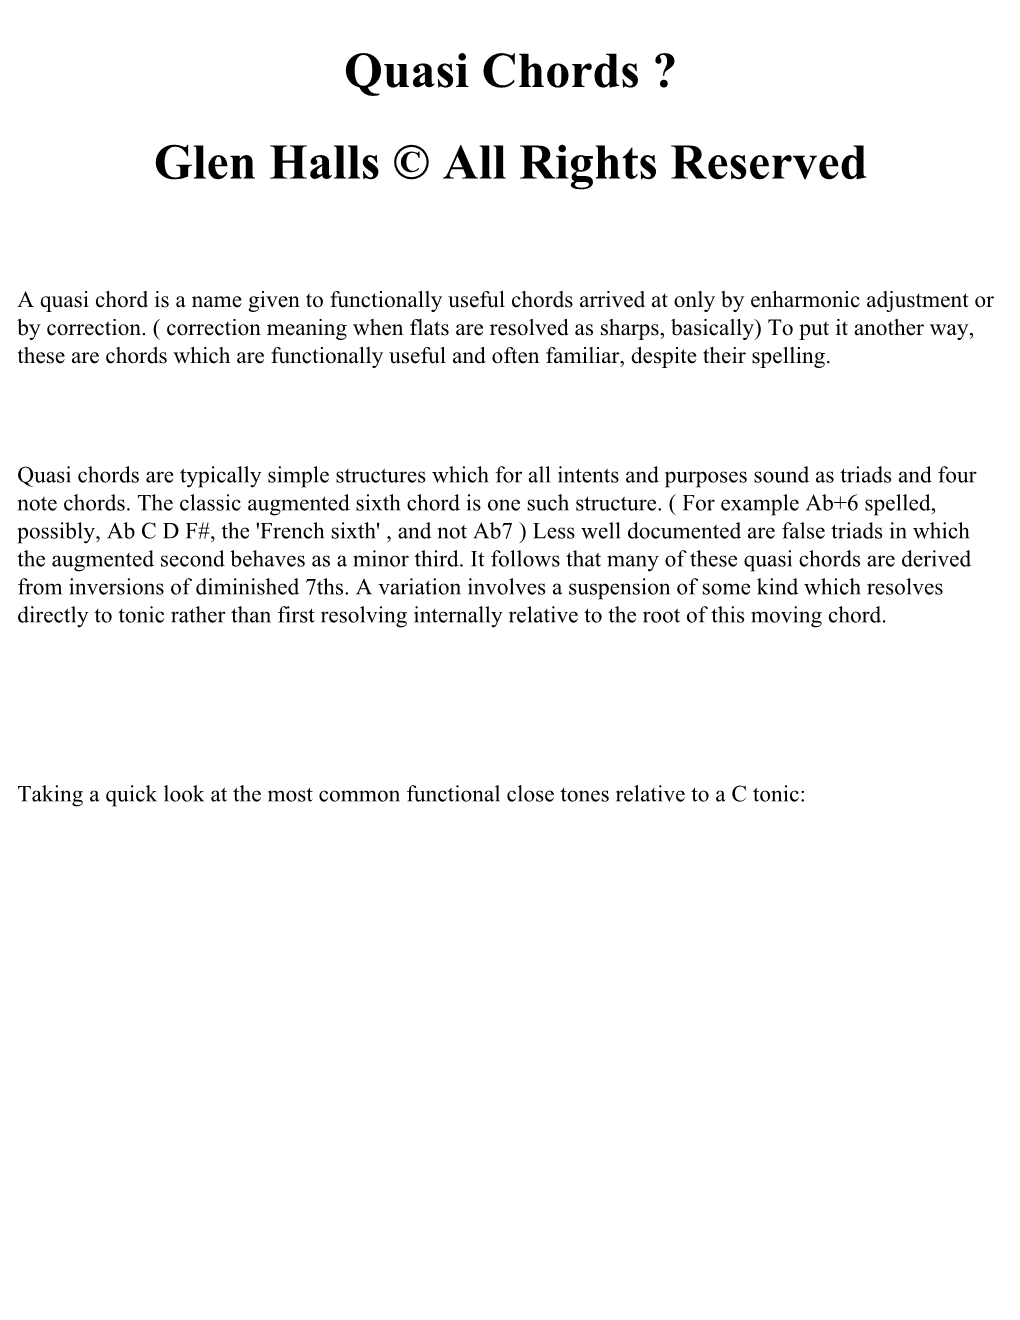 Quasi Chords ? Glen Halls © All Rights Reserved